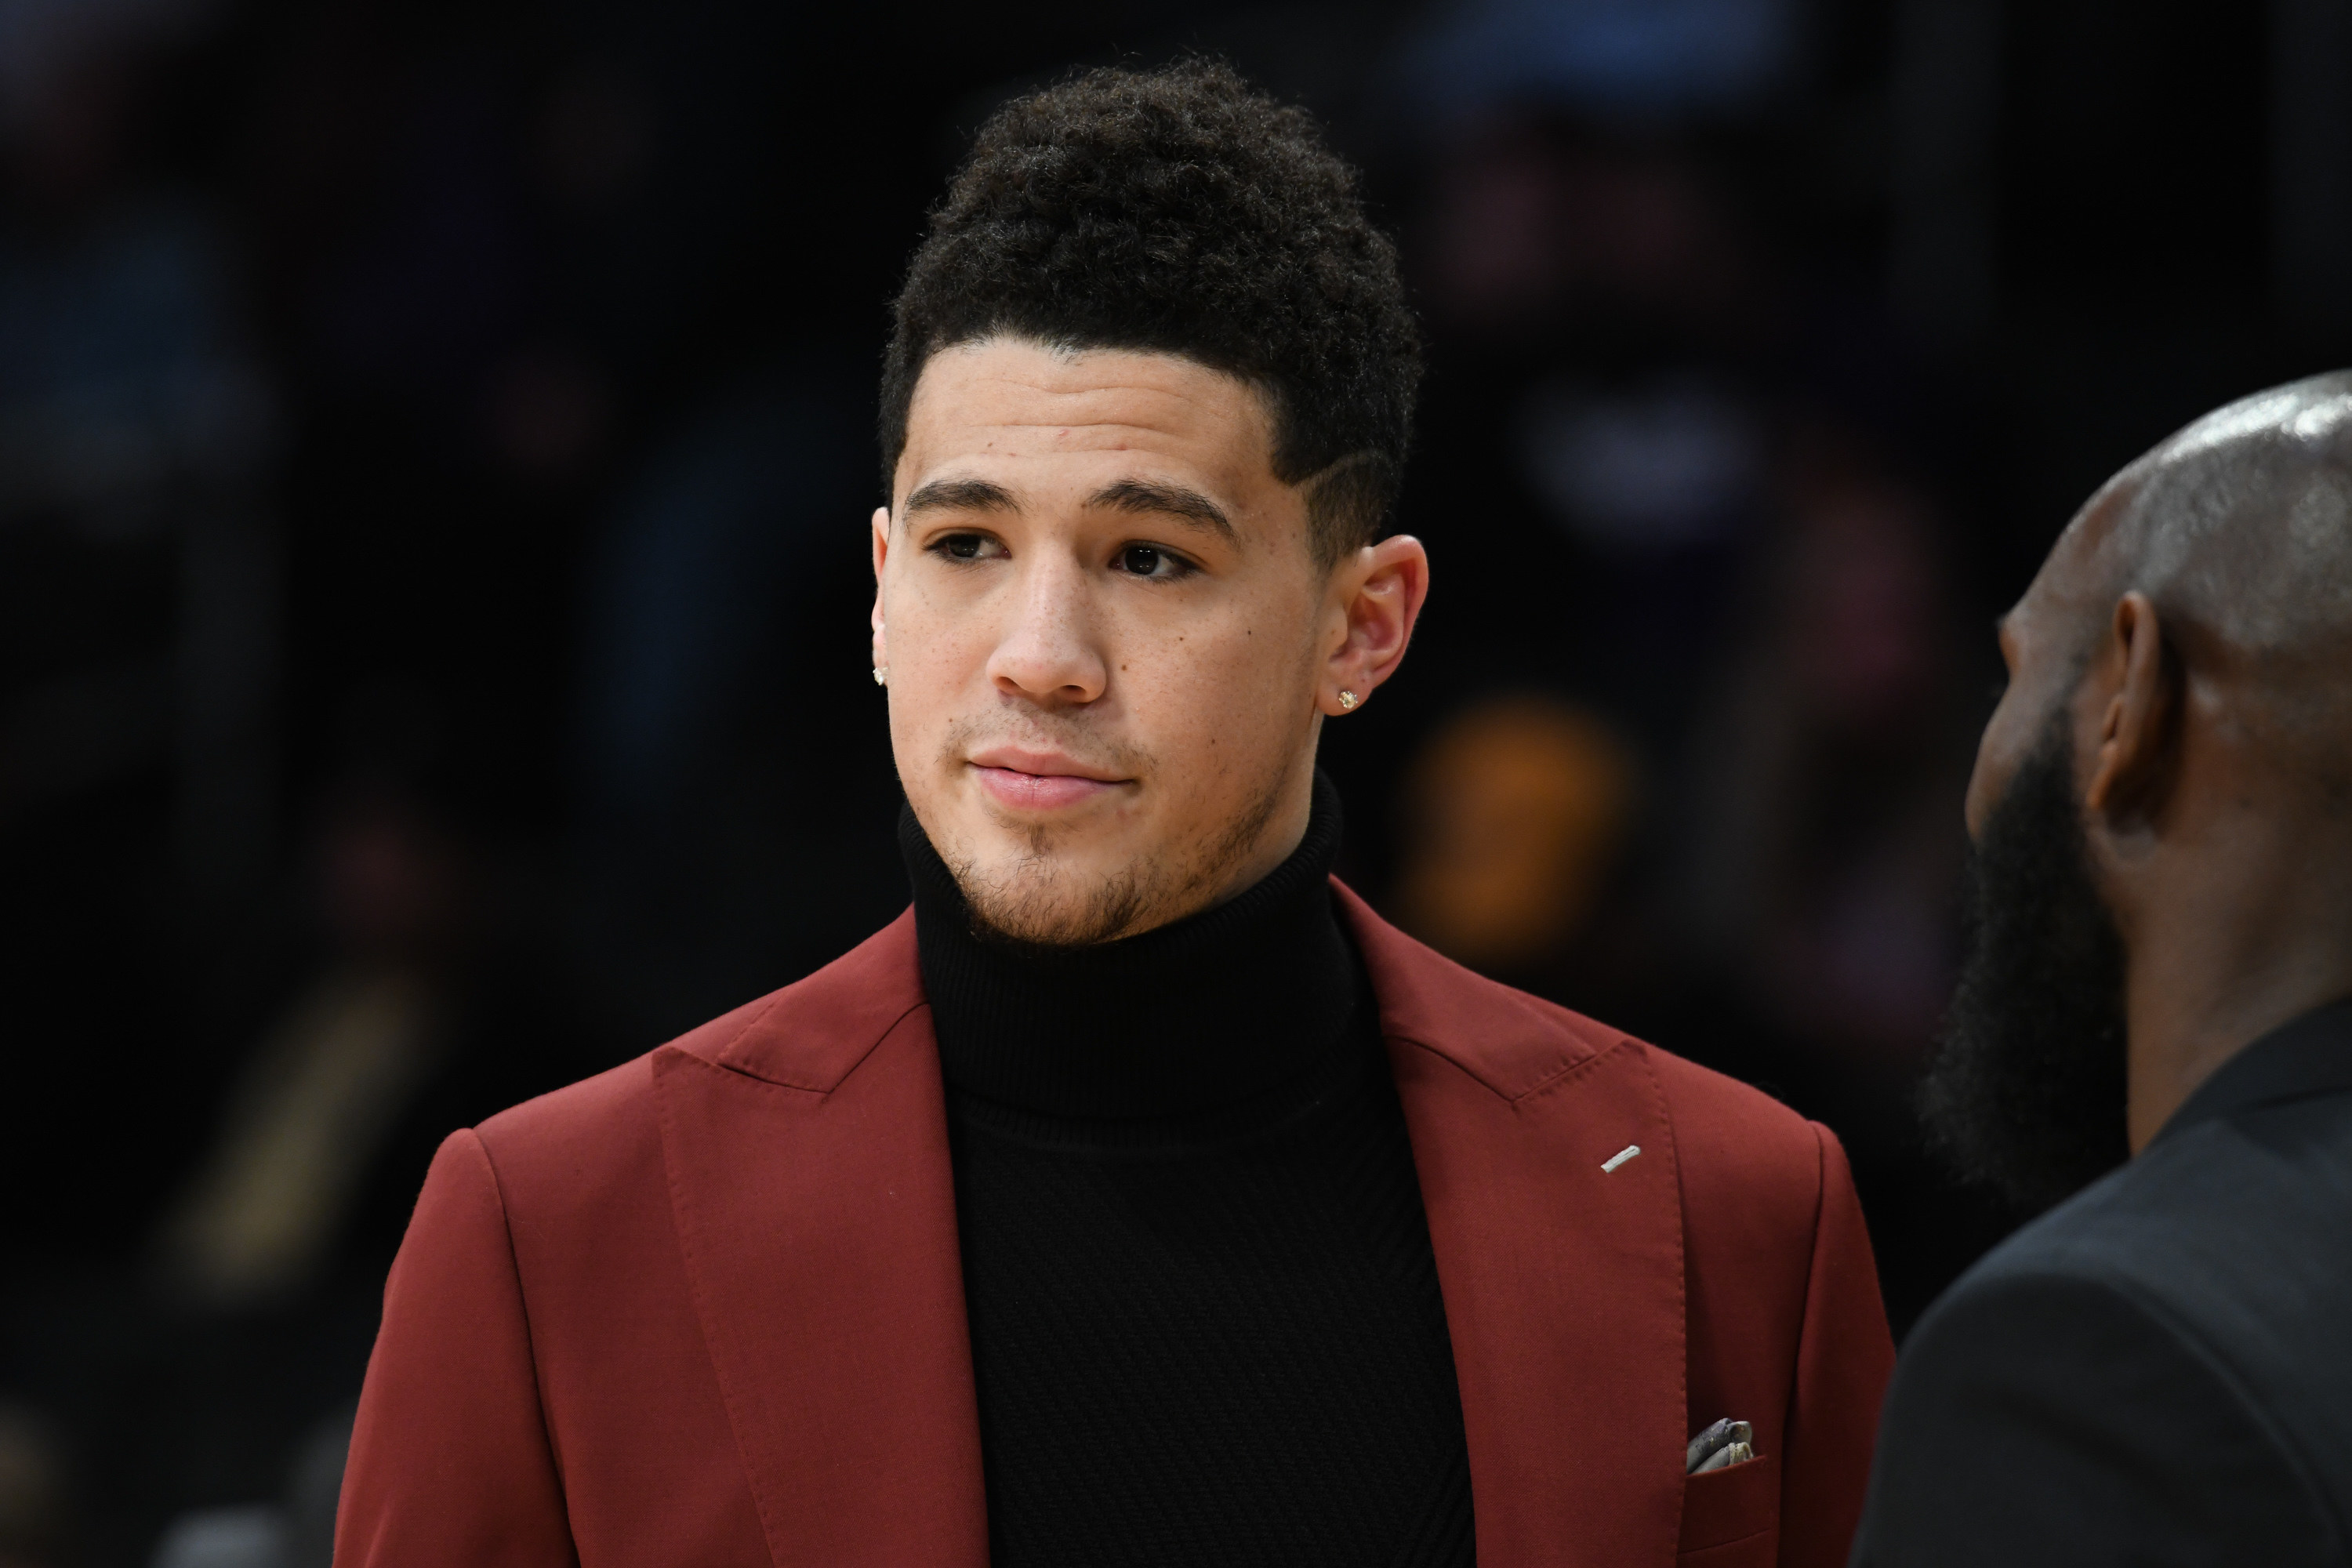 Devin Booker attends a basketball game between the Los Angeles Lakers and the Phoenix Suns at Staples Center on February 6, 2018 in Los Angeles, California